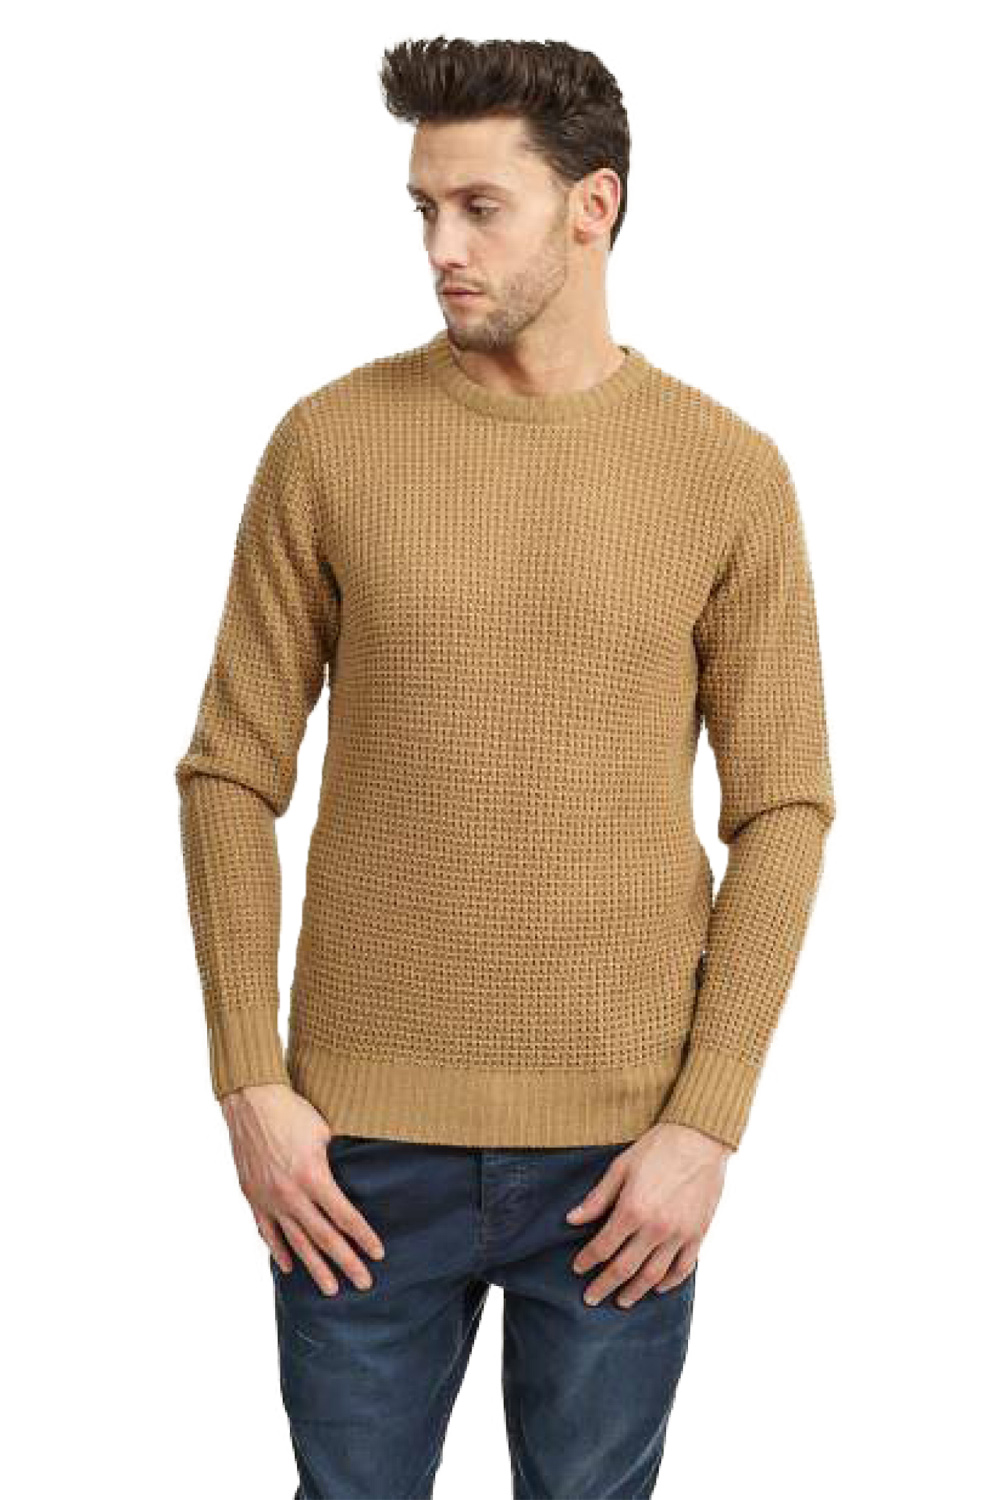 Brave Soul Mens Chunky Waffle Knit Jumper Classic Crew Neck Long Sleeve ...